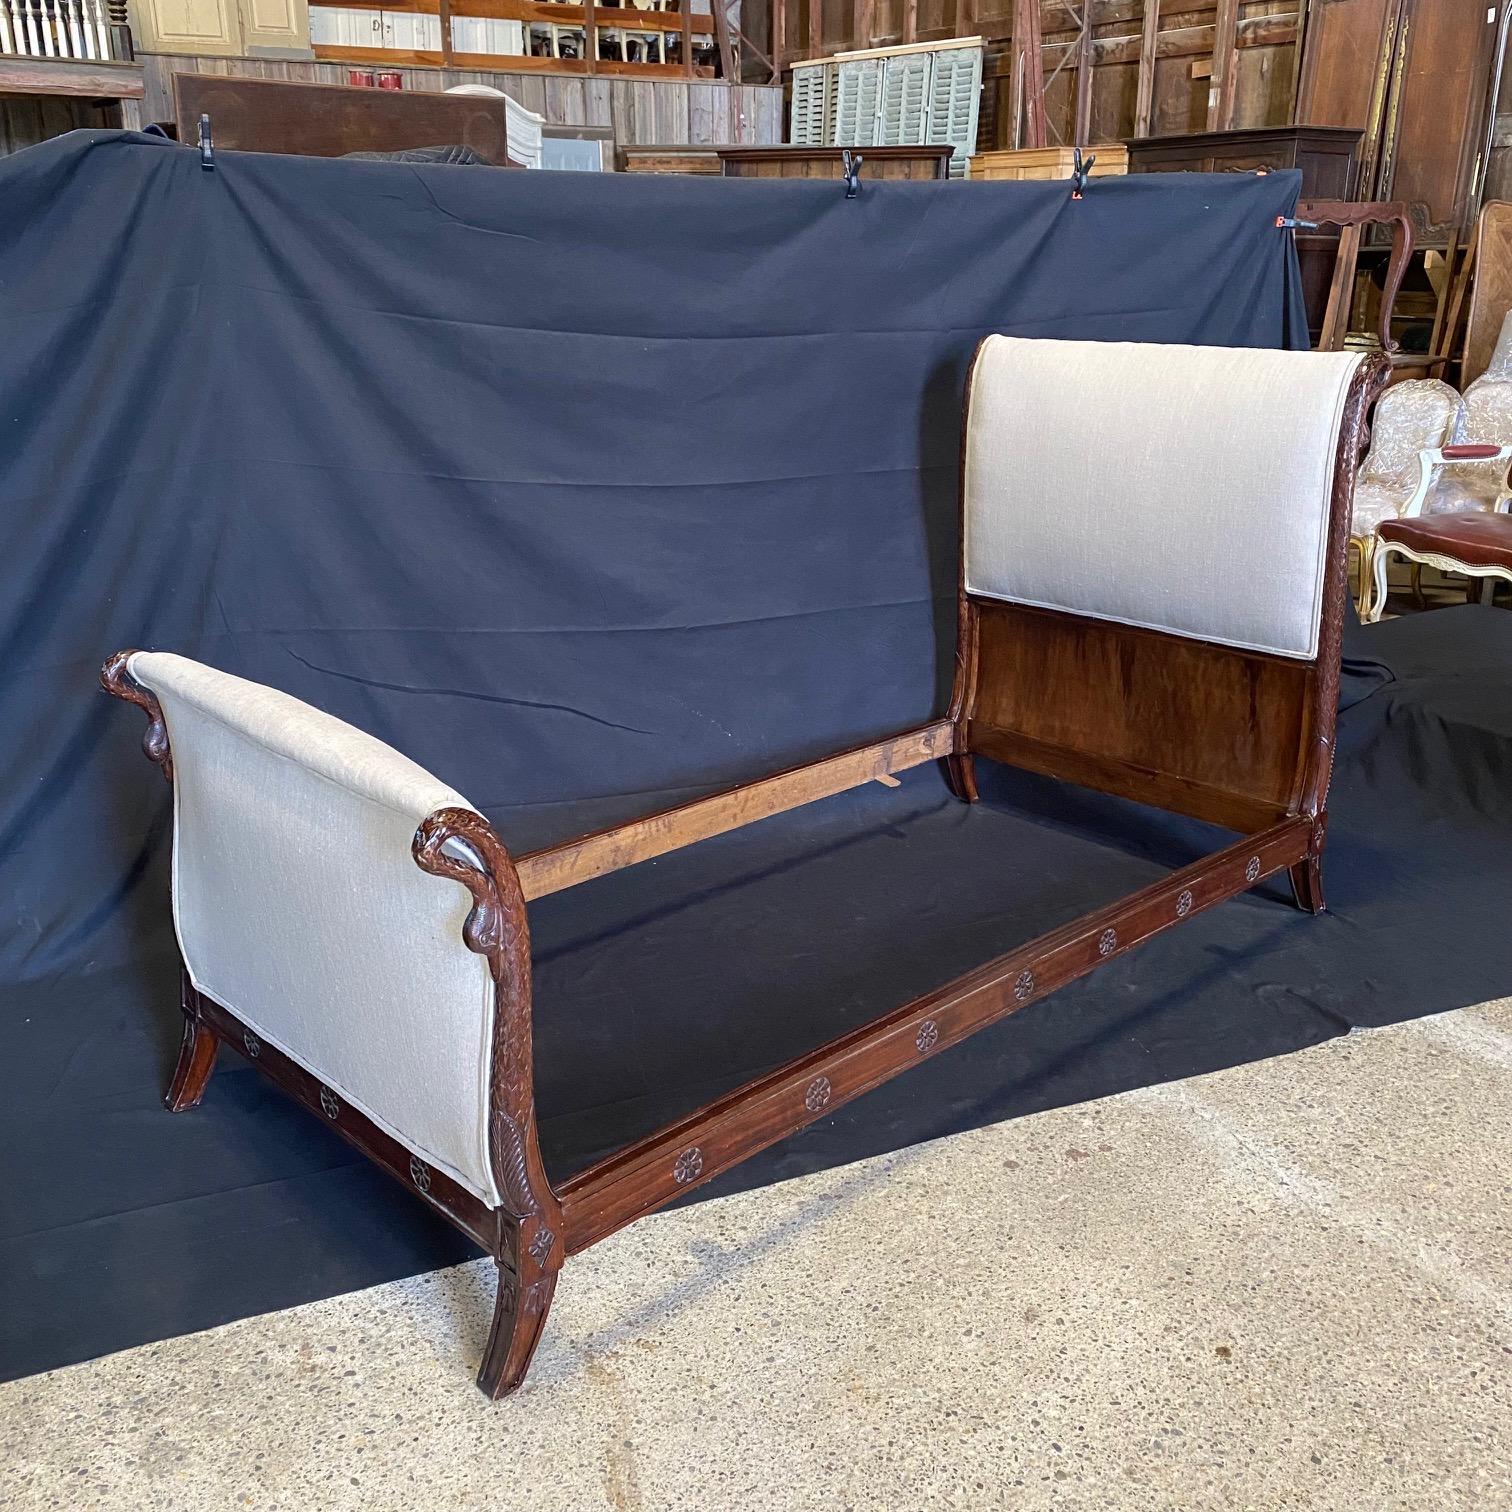 Early 20th century French Empire daybed featuring carved swan neck ends. Crafted from rich walnut having gorgeous neoclassical motifs of rosettes and acanthus leaves. Supported by carved sloping tapered legs and new high quality upholstery. Will